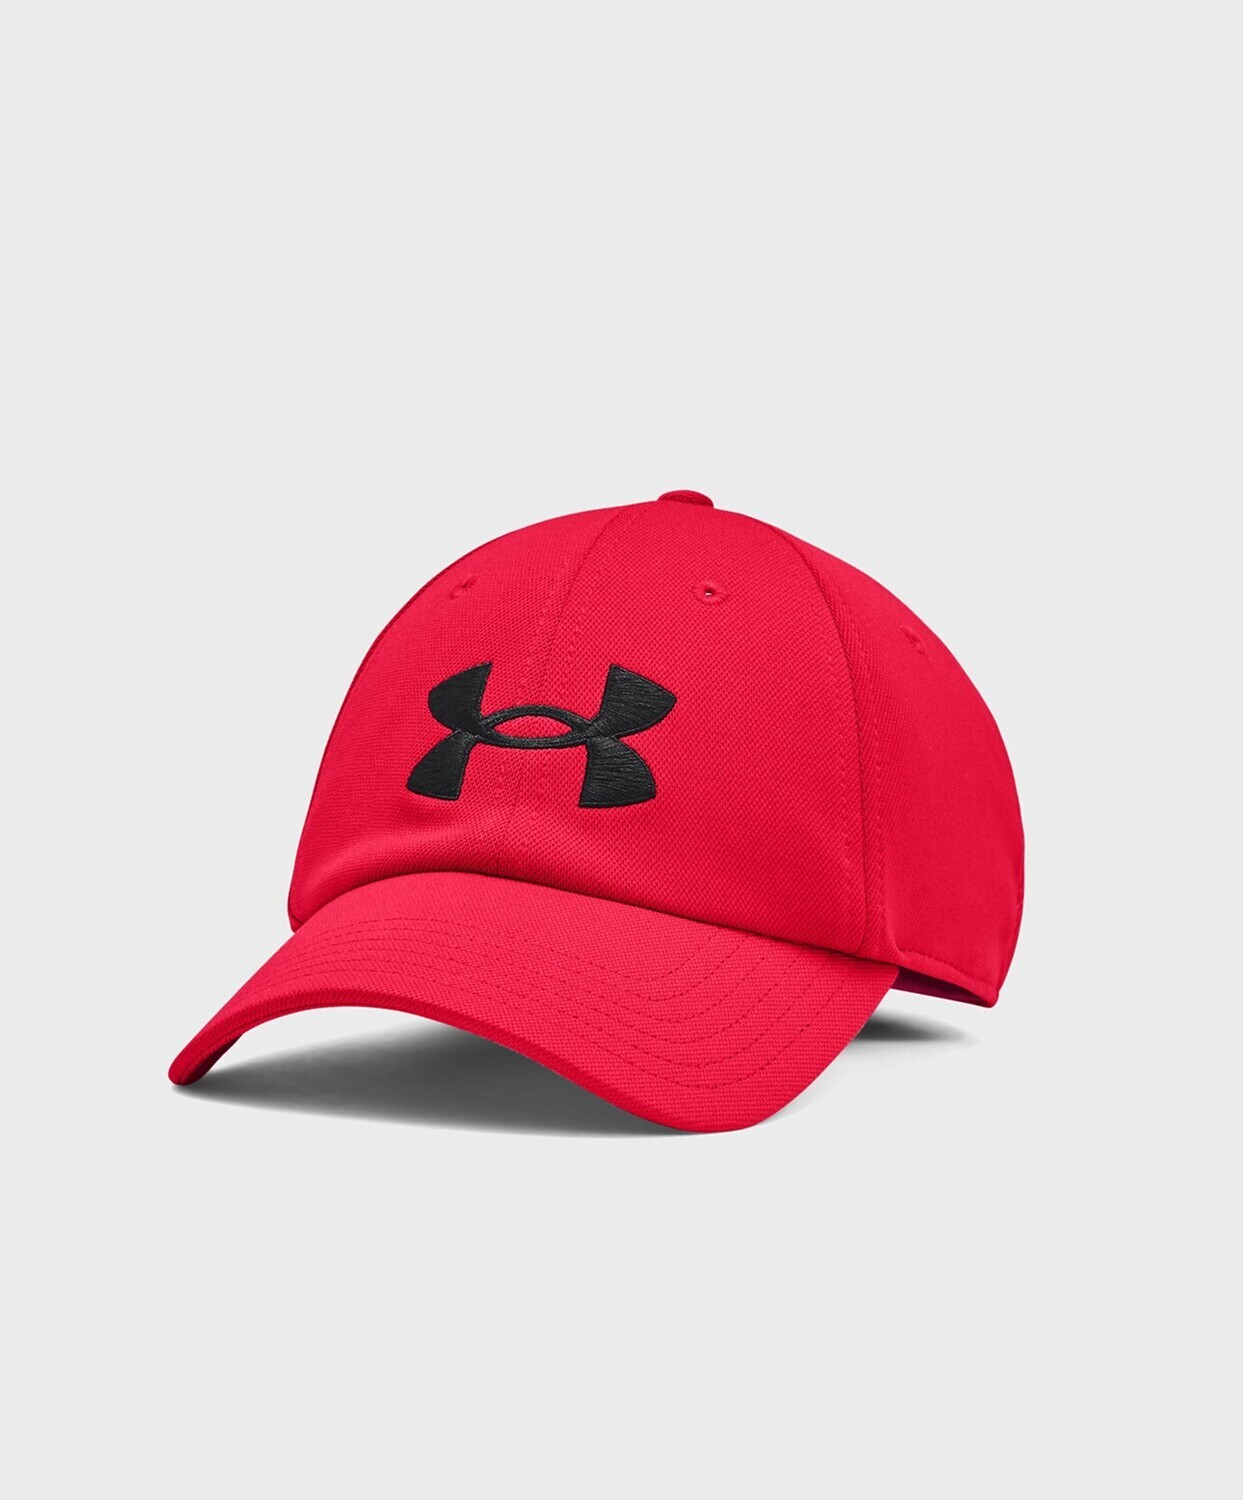 Кепка "UA Blitzing Adjustable Hat", Men's, Red, Under Armour